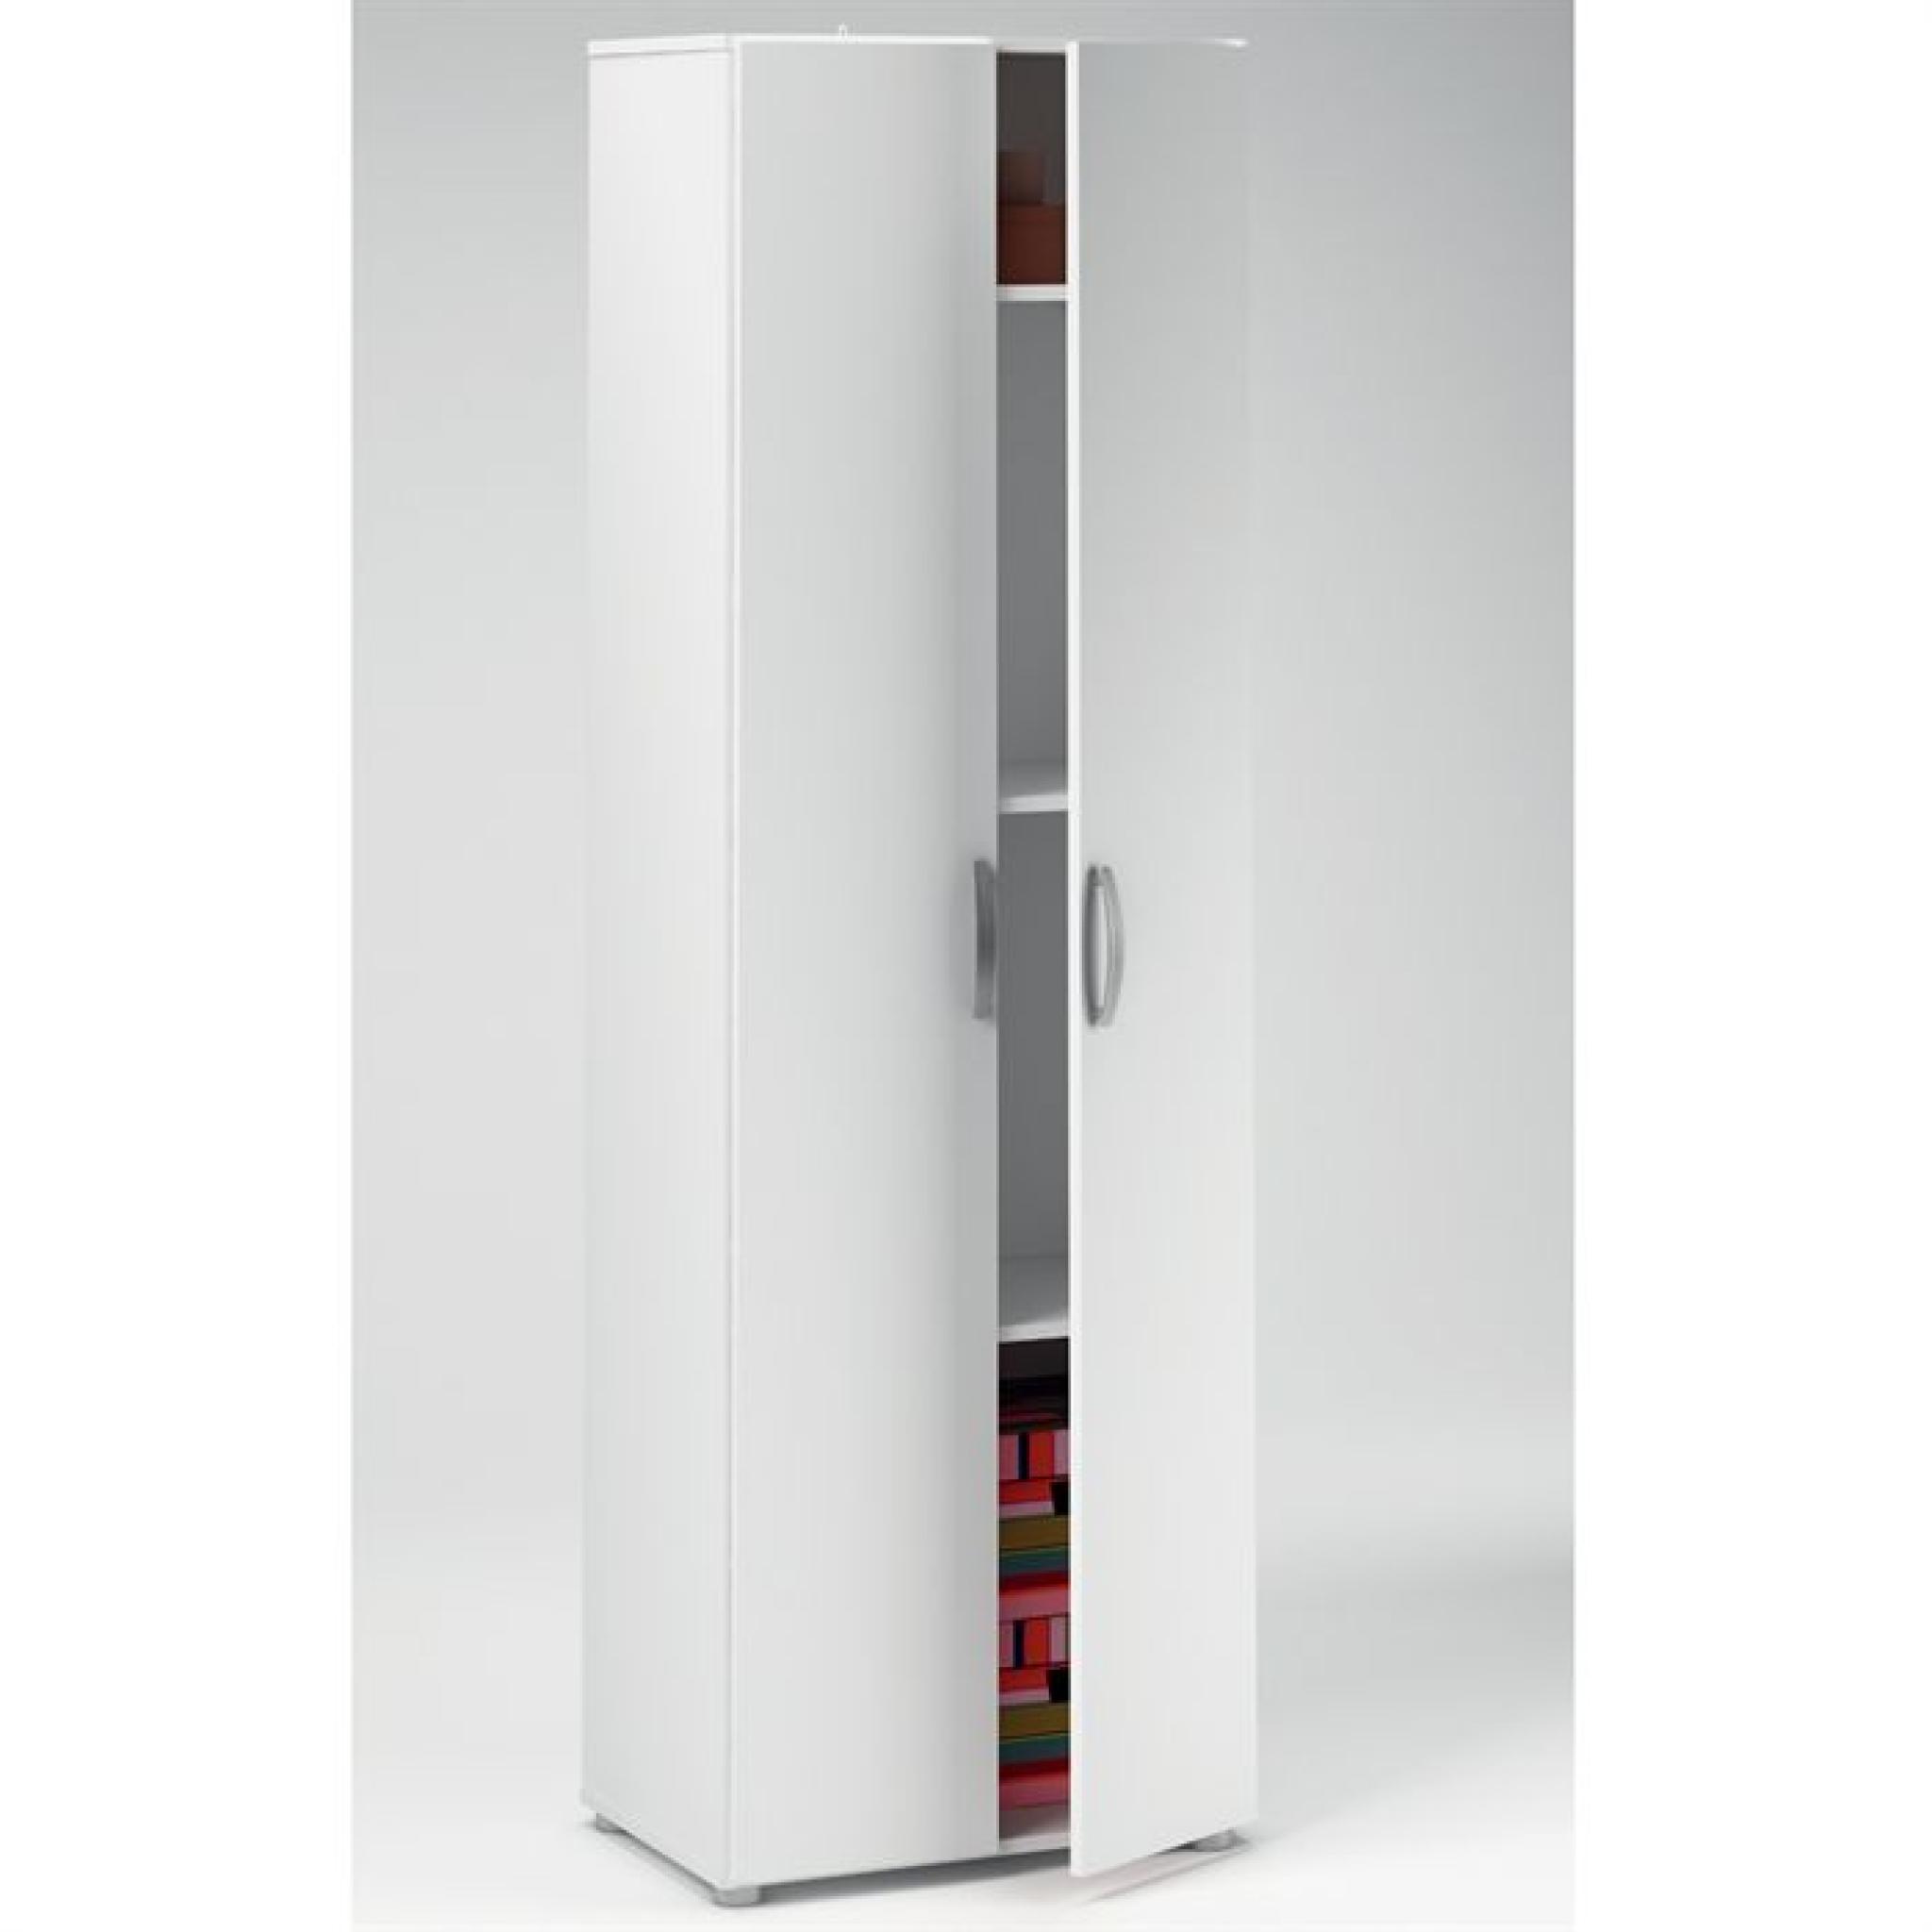 UTIL Armoire multifonction 2 portes 3 rayons